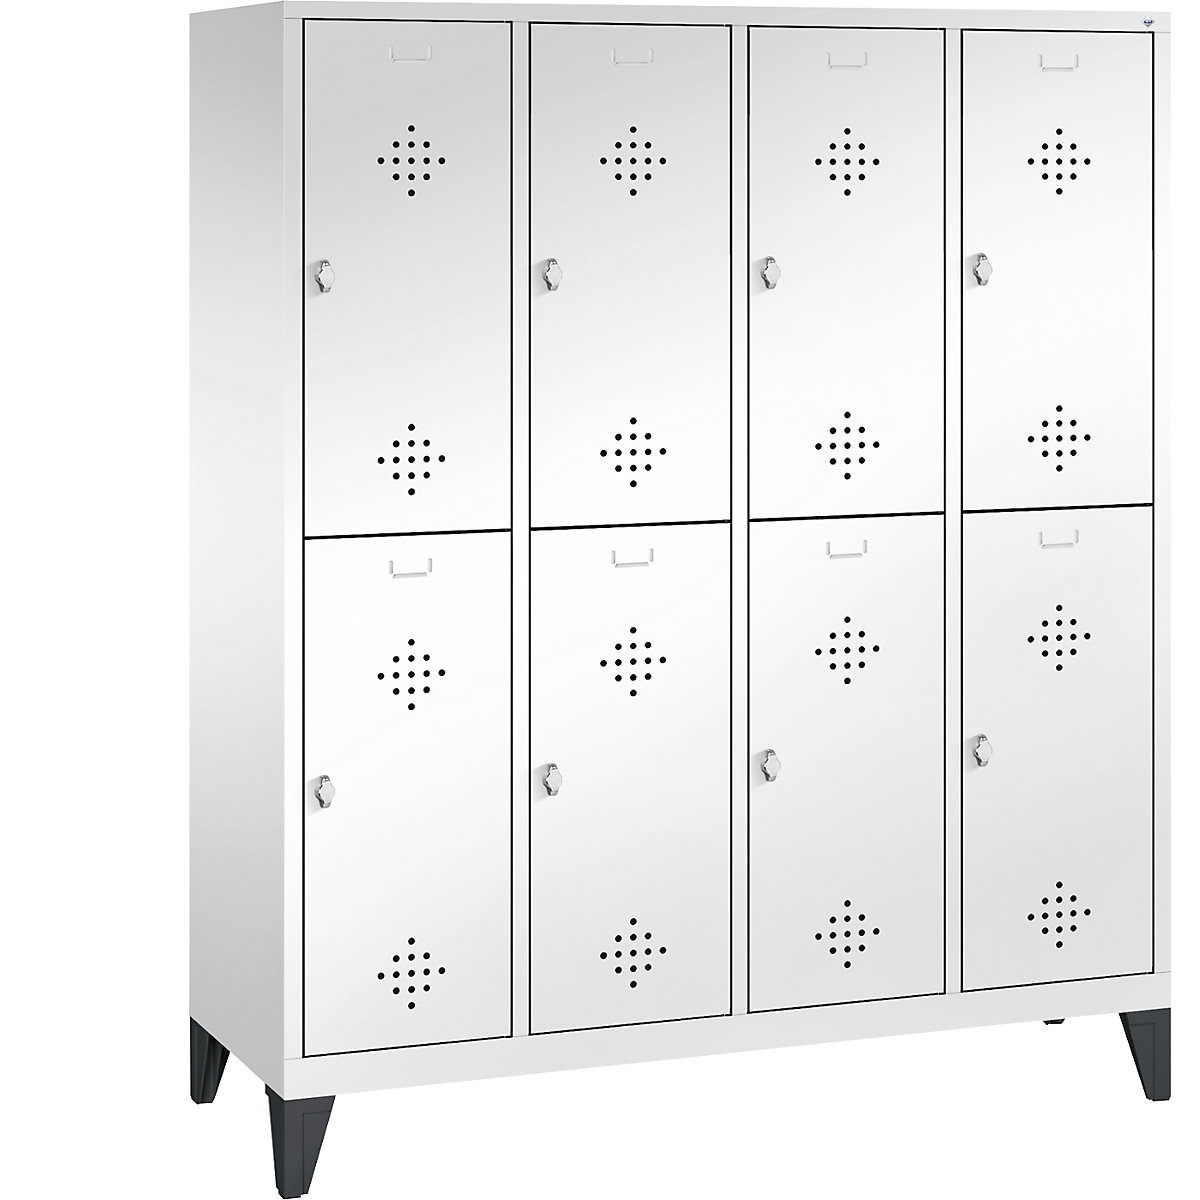 CLASSIC cloakroom locker with feet, double tier - C+P